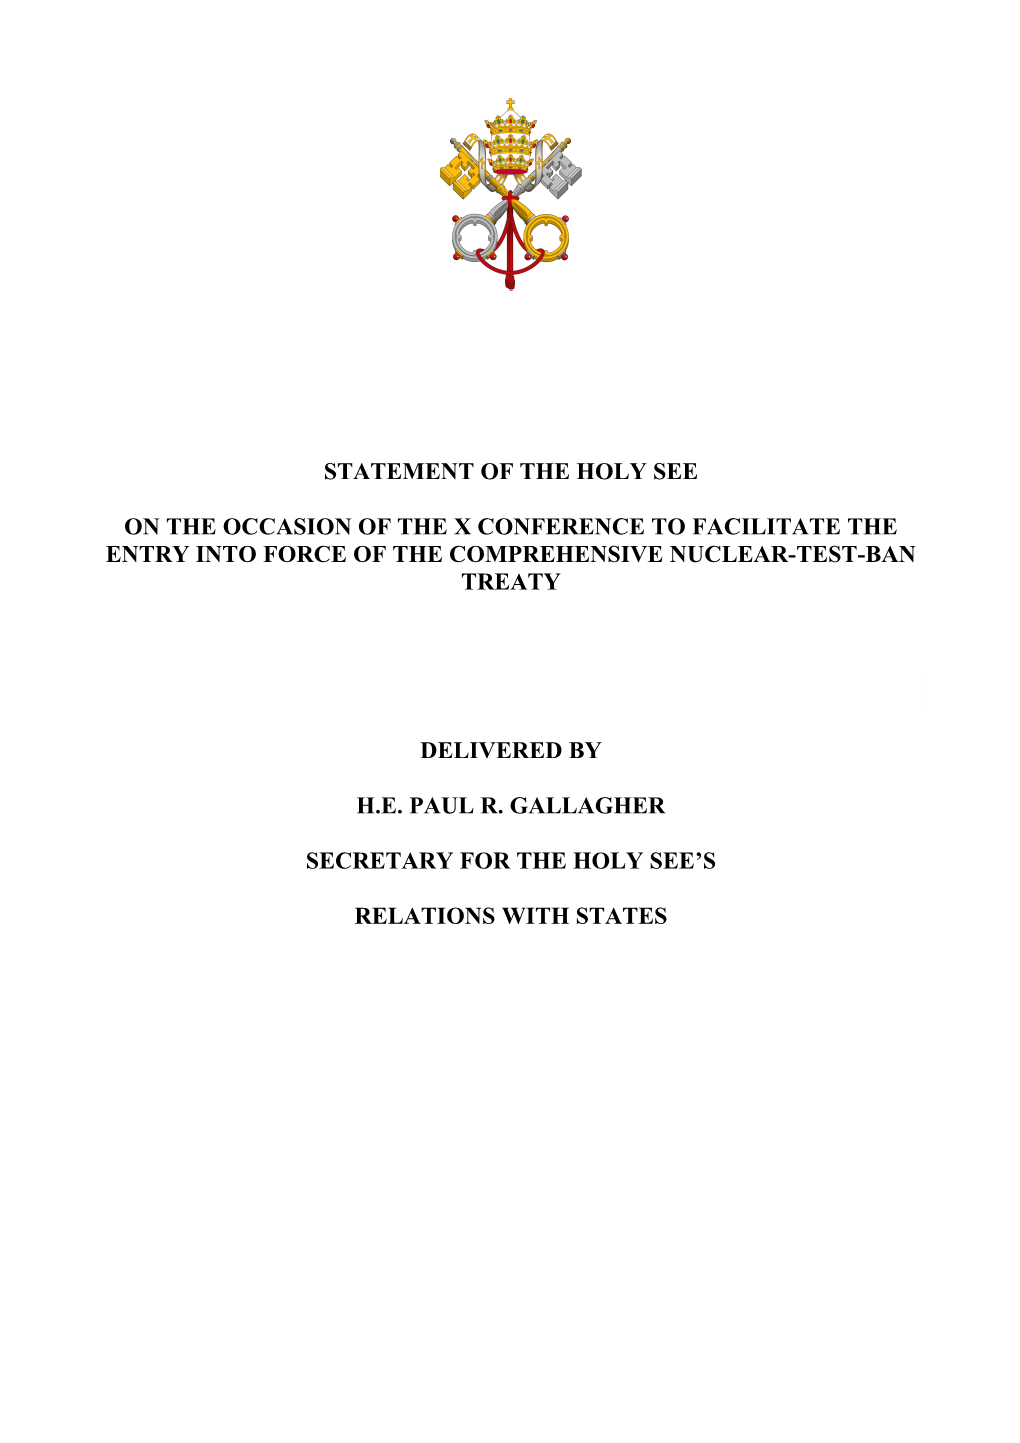 Statement of the Holy See